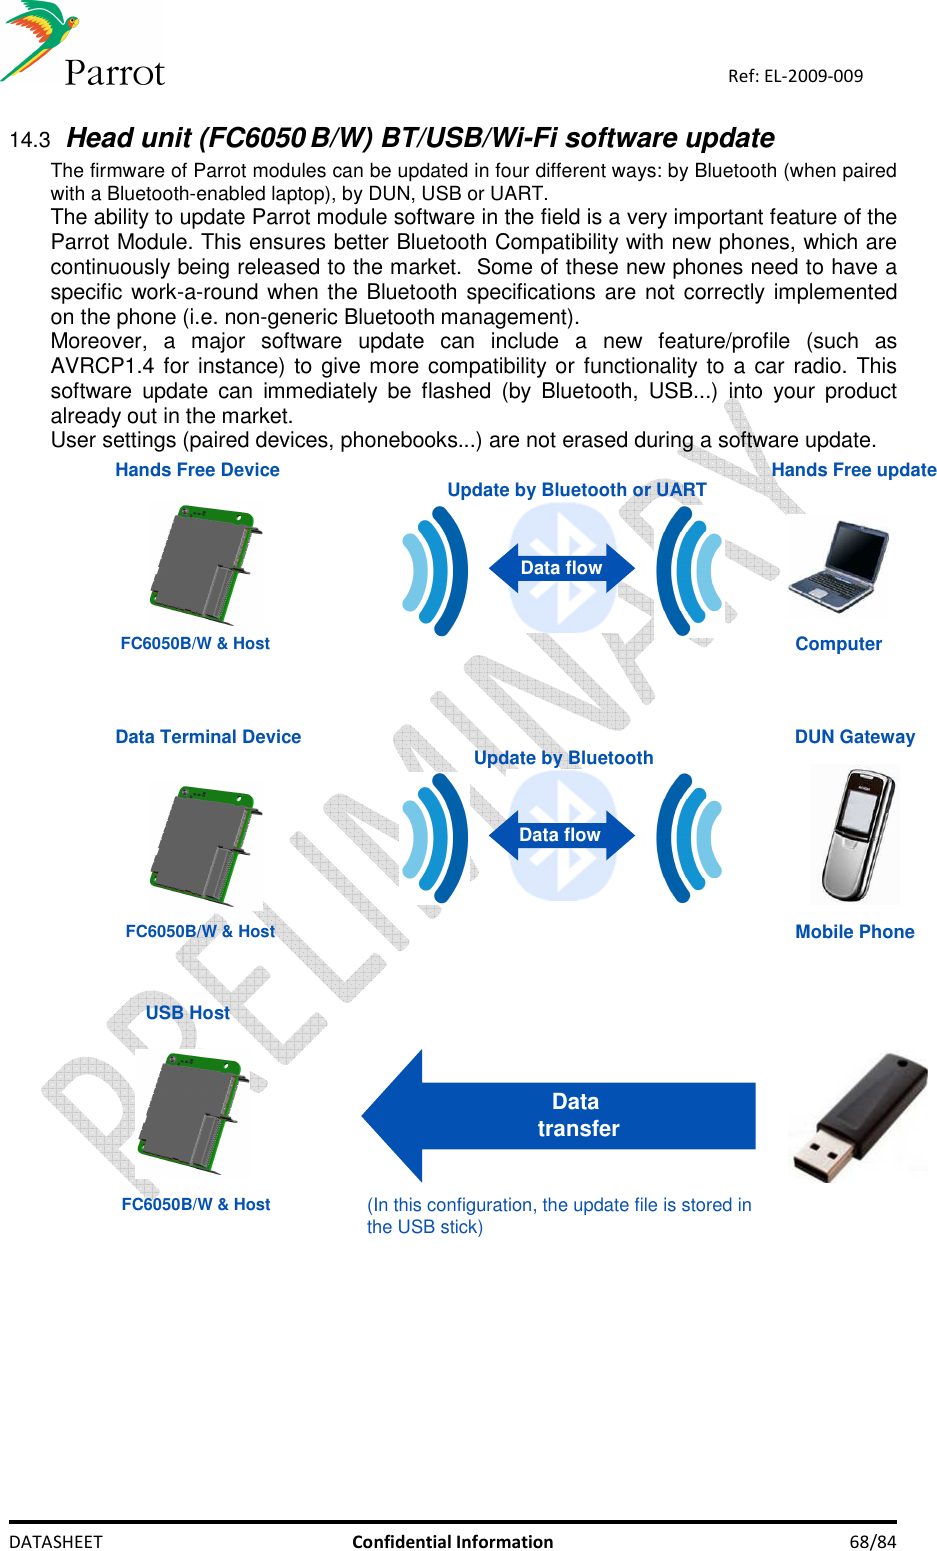    DATASHEET  Confidential Information  68/84 Ref: EL-2009-009 14.3 Head unit (FC6050 B/W) BT/USB/Wi-Fi software update The firmware of Parrot modules can be updated in four different ways: by Bluetooth (when paired with a Bluetooth-enabled laptop), by DUN, USB or UART. The ability to update Parrot module software in the field is a very important feature of the Parrot Module. This ensures better Bluetooth Compatibility with new phones, which are continuously being released to the market.  Some of these new phones need to have a specific work-a-round when the Bluetooth specifications are not correctly implemented on the phone (i.e. non-generic Bluetooth management). Moreover,  a  major  software  update  can  include  a  new  feature/profile  (such  as AVRCP1.4 for instance) to  give more compatibility or functionality to a car radio. This software  update  can  immediately  be  flashed  (by  Bluetooth,  USB...)  into  your  product already out in the market.  User settings (paired devices, phonebooks...) are not erased during a software update.   Hands Free update Hands Free DeviceComputerUpdate by Bluetooth or UARTData flow FC6050B/W &amp; Host  DUN Gateway Data Terminal DeviceMobile PhoneData flowUpdate by BluetoothFC6050B/W &amp; Host  USB Host Data  transfer (In this configuration, the update file is stored in the USB stick) FC6050B/W &amp; Host 